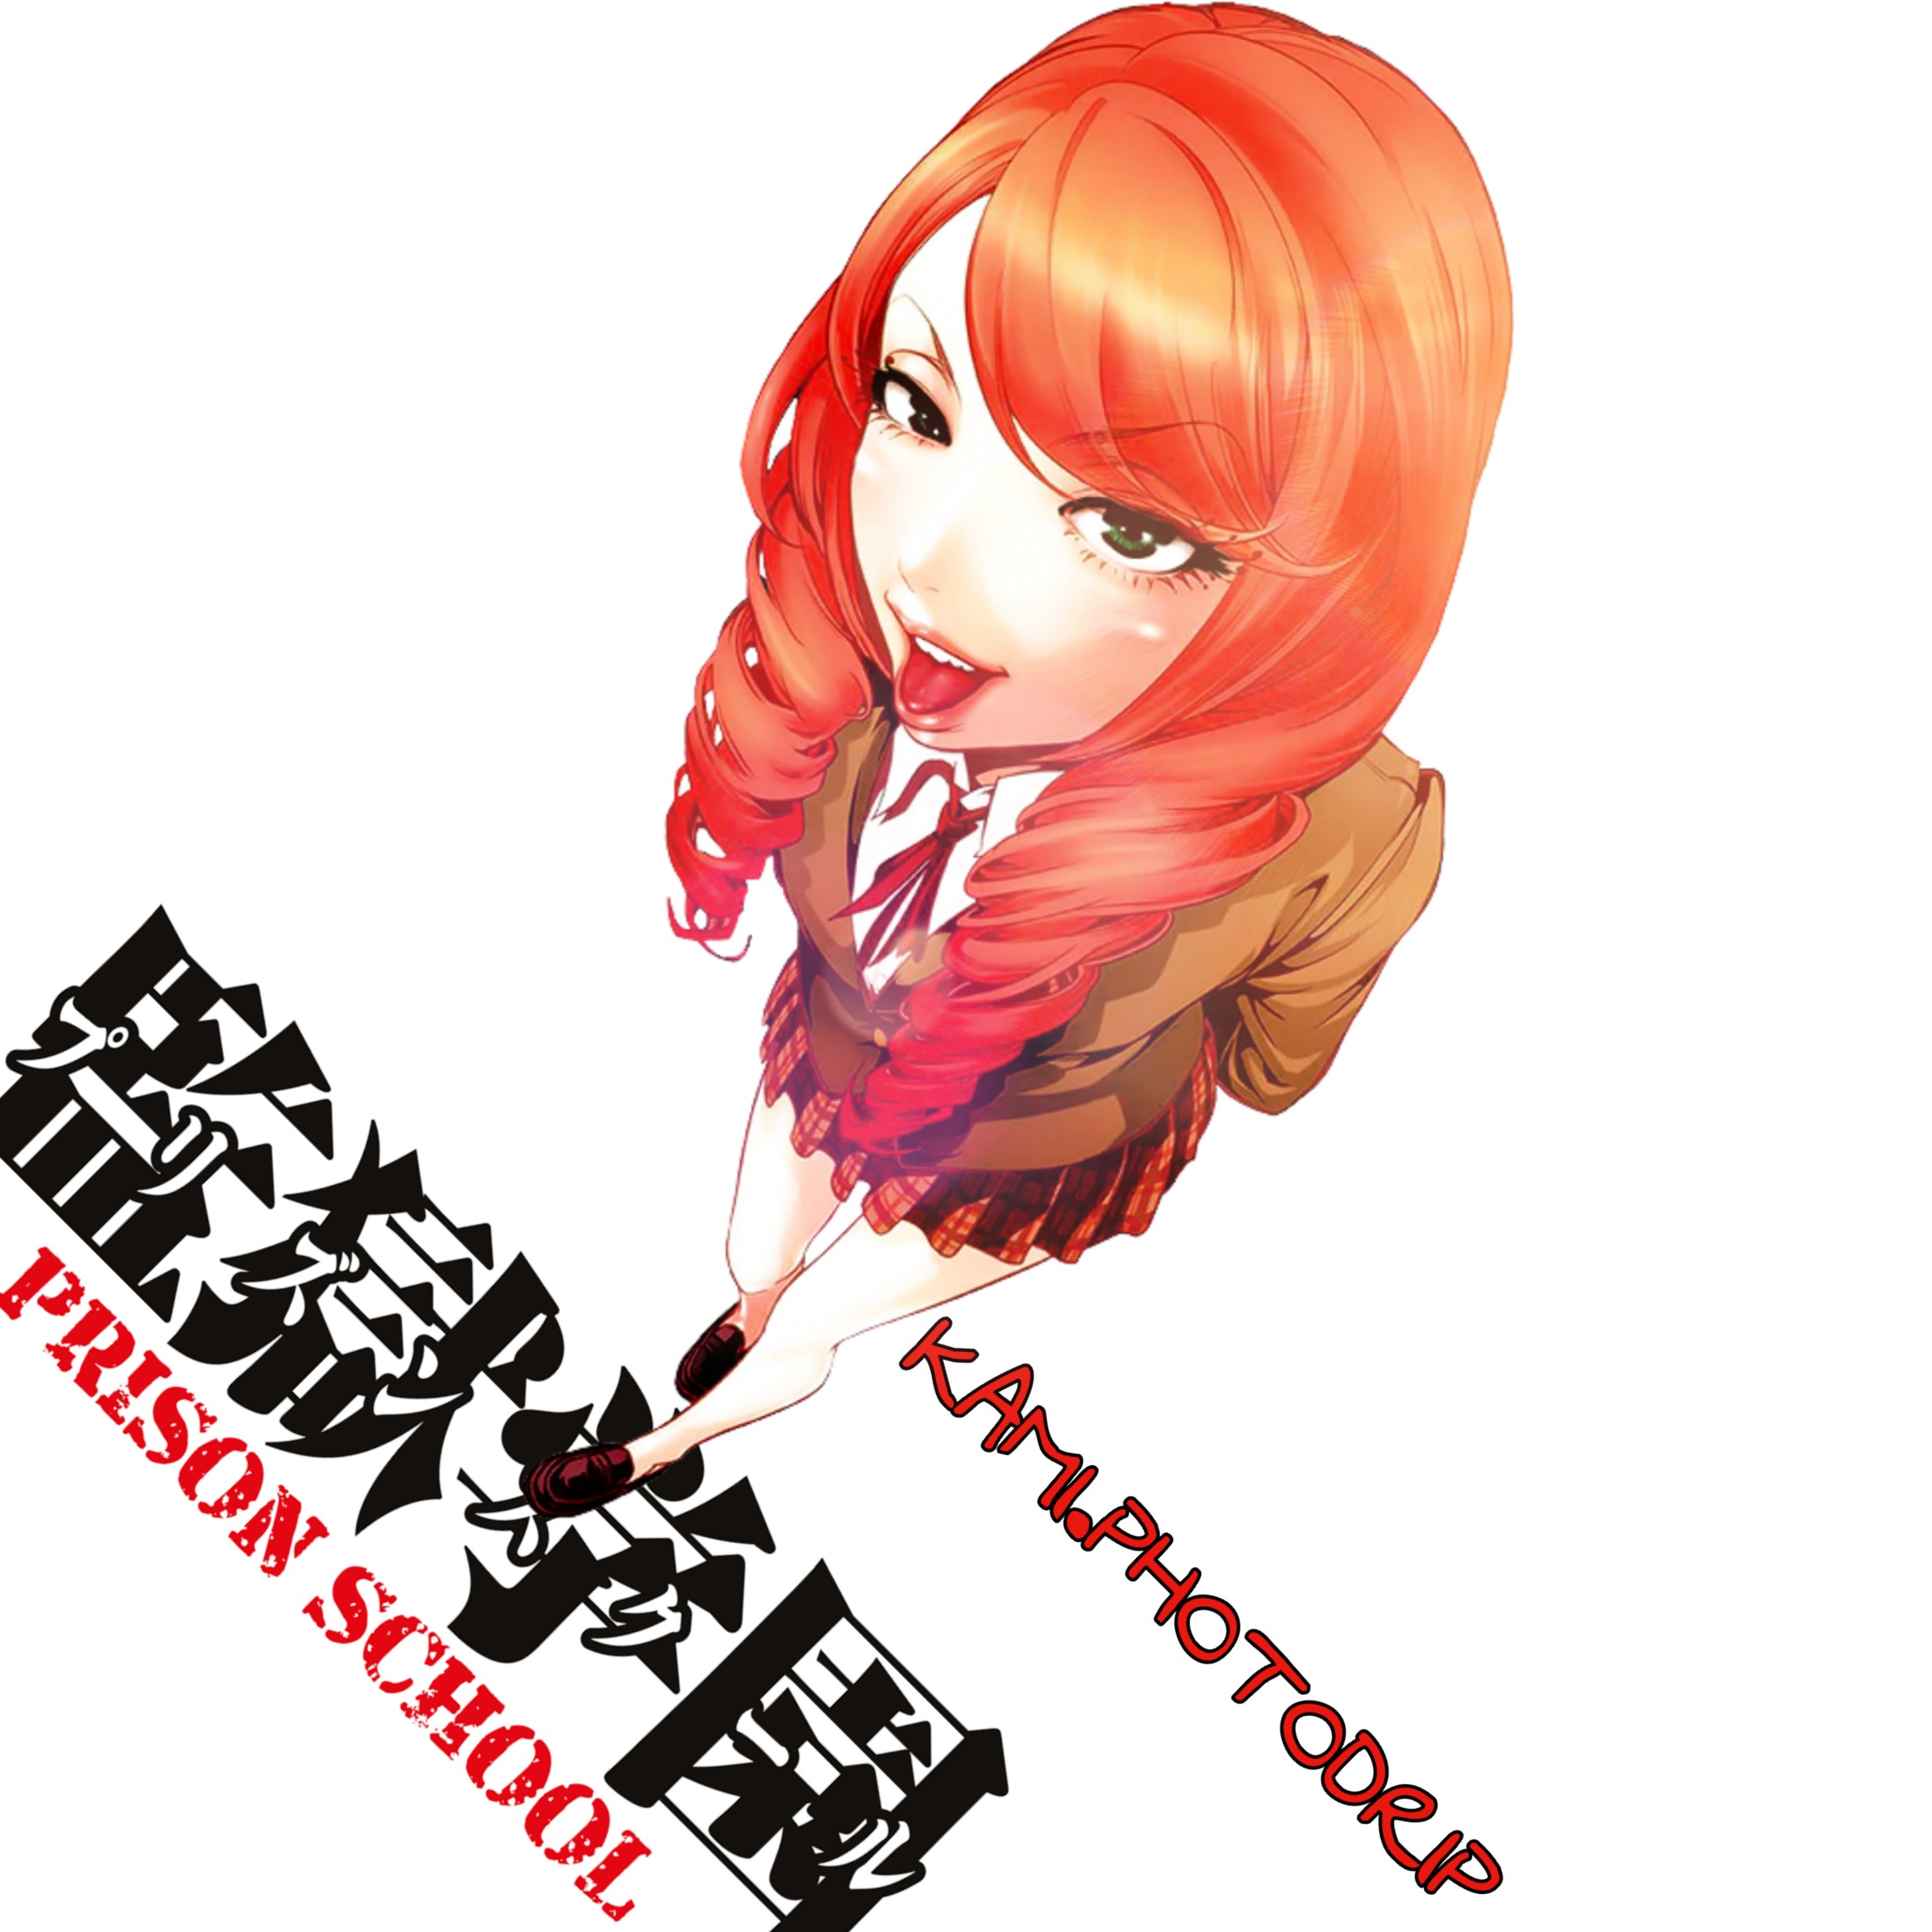 In My Opinion One Of The Most Funniest Anime If You - Prison School Art Book - HD Wallpaper 